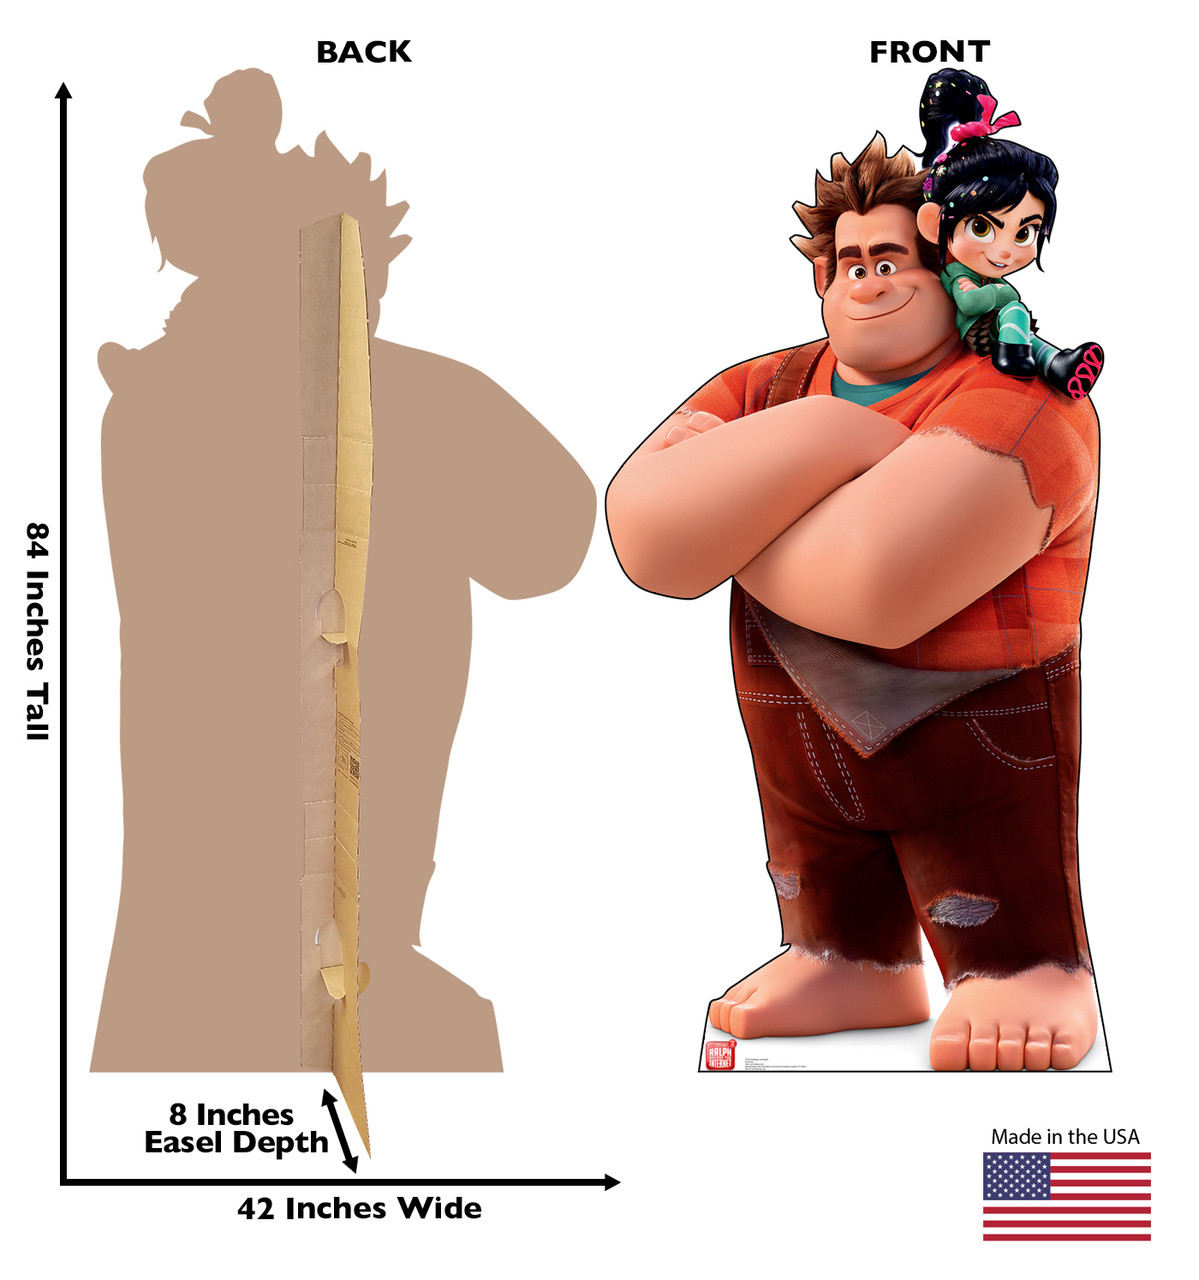 Life-size cardboard standee of Vanellope and Ralph from Wreck-It-Ralph 2 with back and front dimensions.